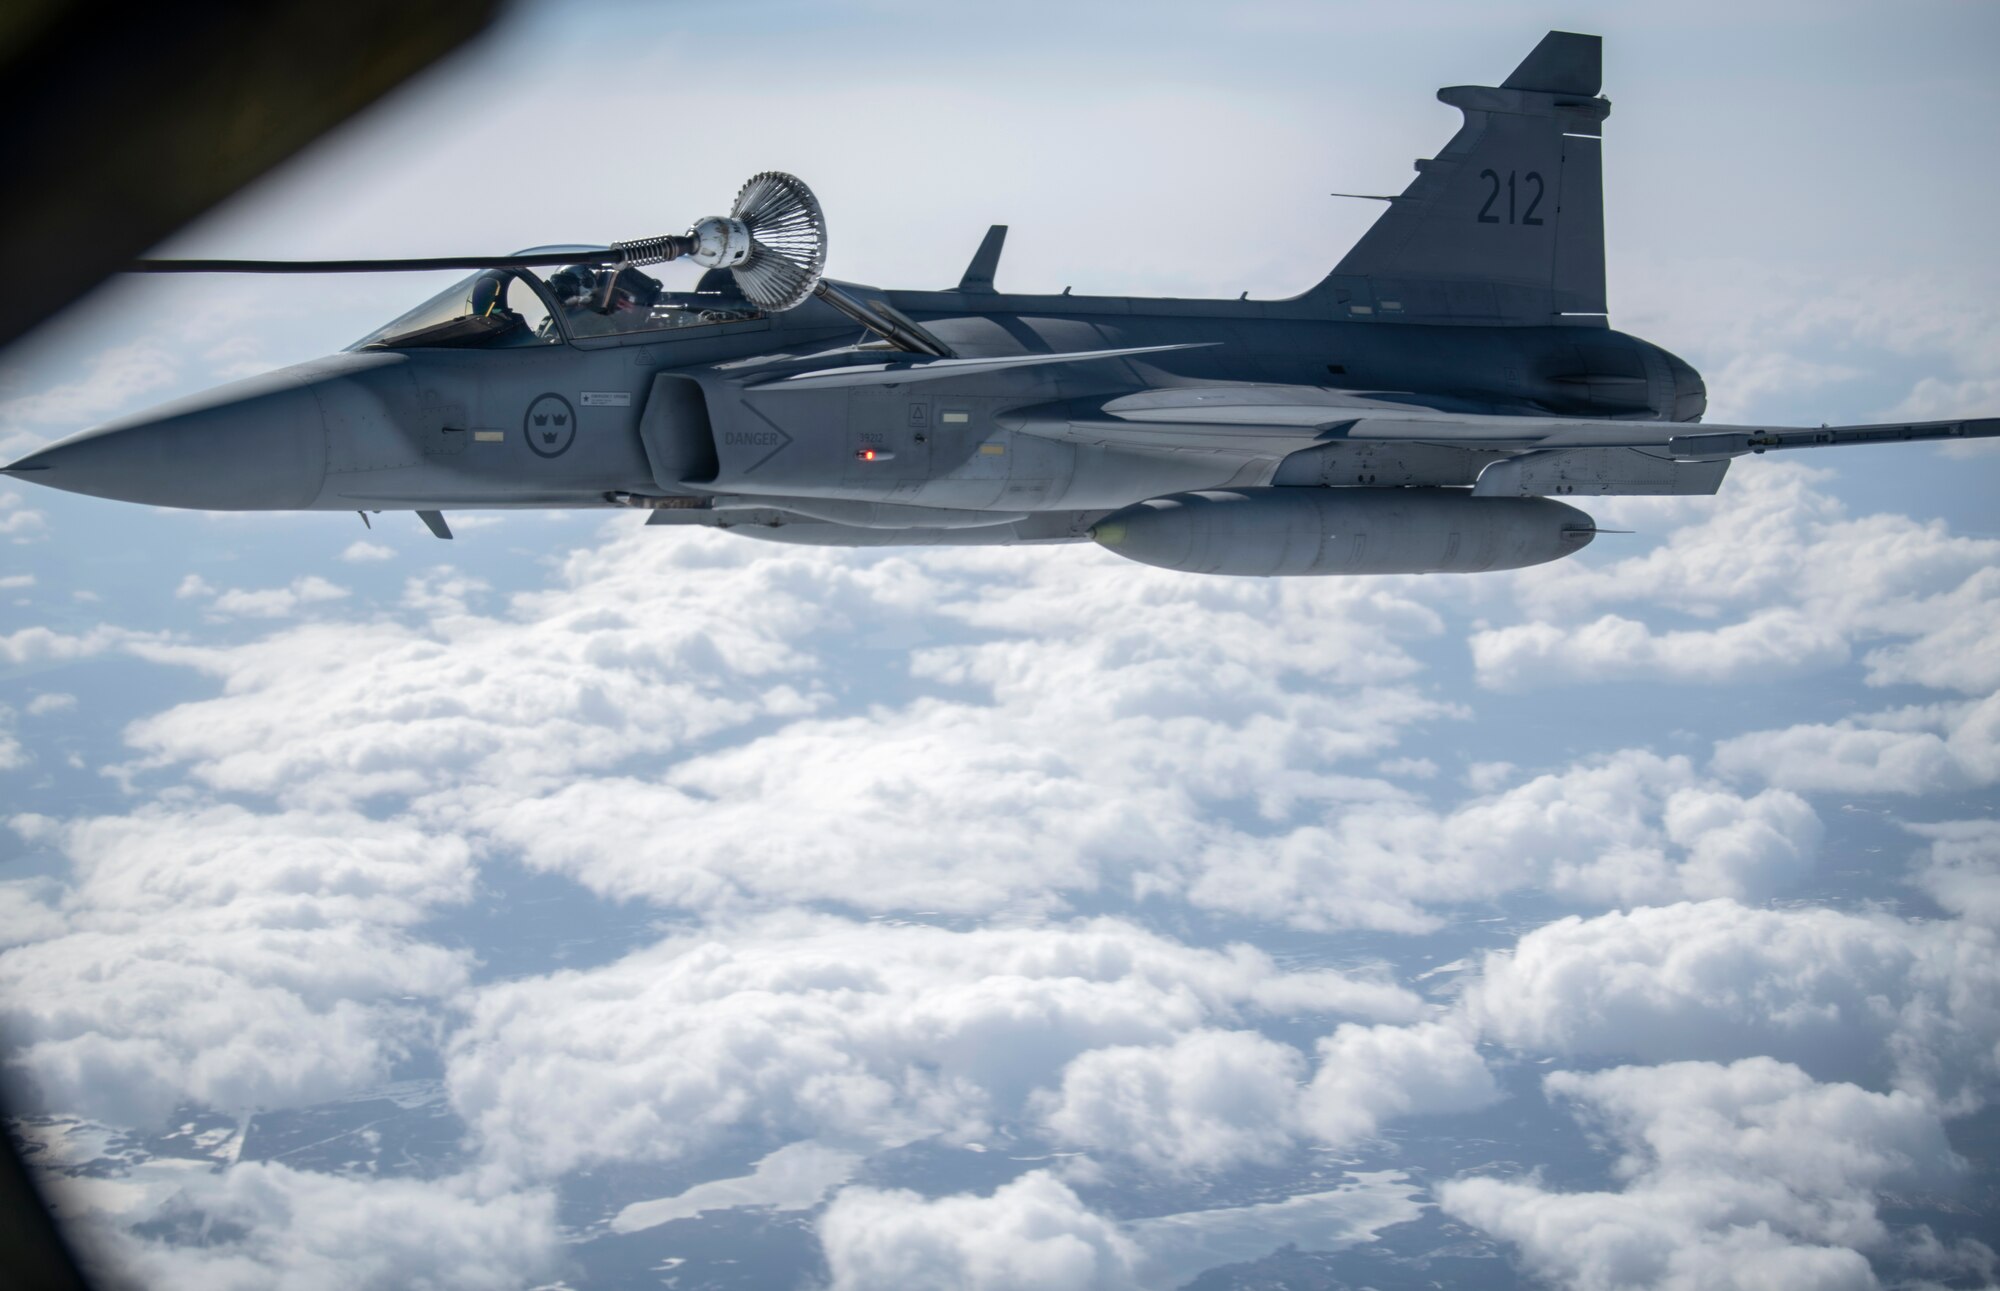 A Swedish Armed Forces Gripen receives fuel from a KC-135 Stratotanker from the 100th Air Refueling Wing, RAF Mildenhall, England, during a Bomber Task Force Europe mission over Sweden, May 20, 2020. The mission marked the first time B-1s have flown over Sweden to integrate with Swedish Gripens while conducting close-air support training with Swedish Joint Terminal Attack Controller ground teams at Vidsel Range. (U.S. Air Force photo by Tech. Sgt. Emerson Nuñez)